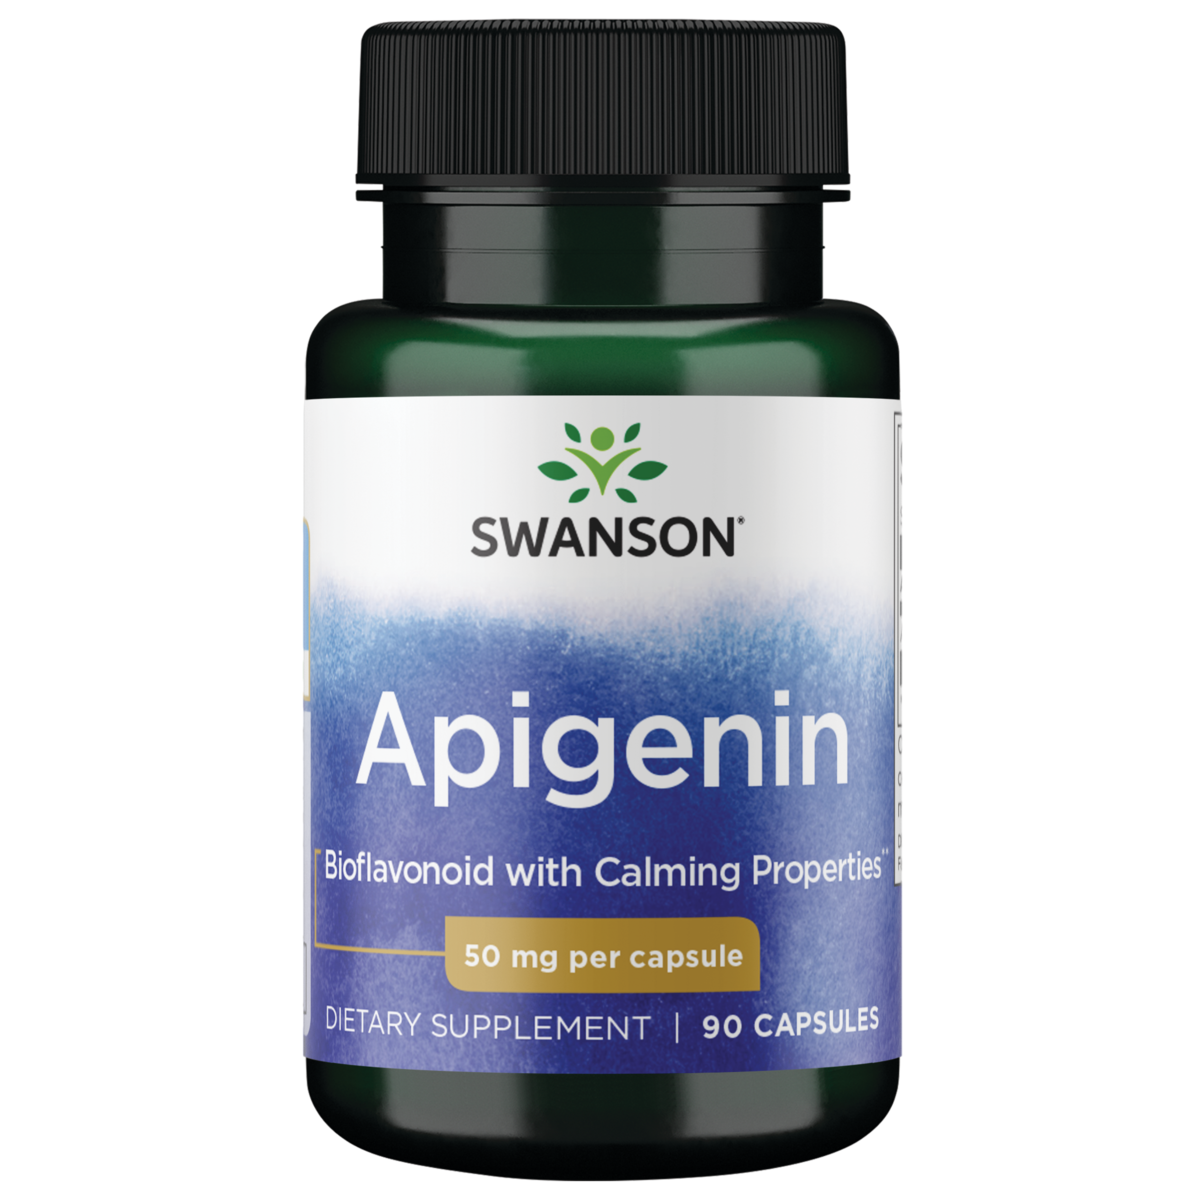 Swanson Apigenin - Natural Supplement Promoting Prostate Health - Bioflavonoid Supplement Supporting Glucose Metabolism & Nervous System Health - (90 Capsules, 50mg Each) - image 1 of 5